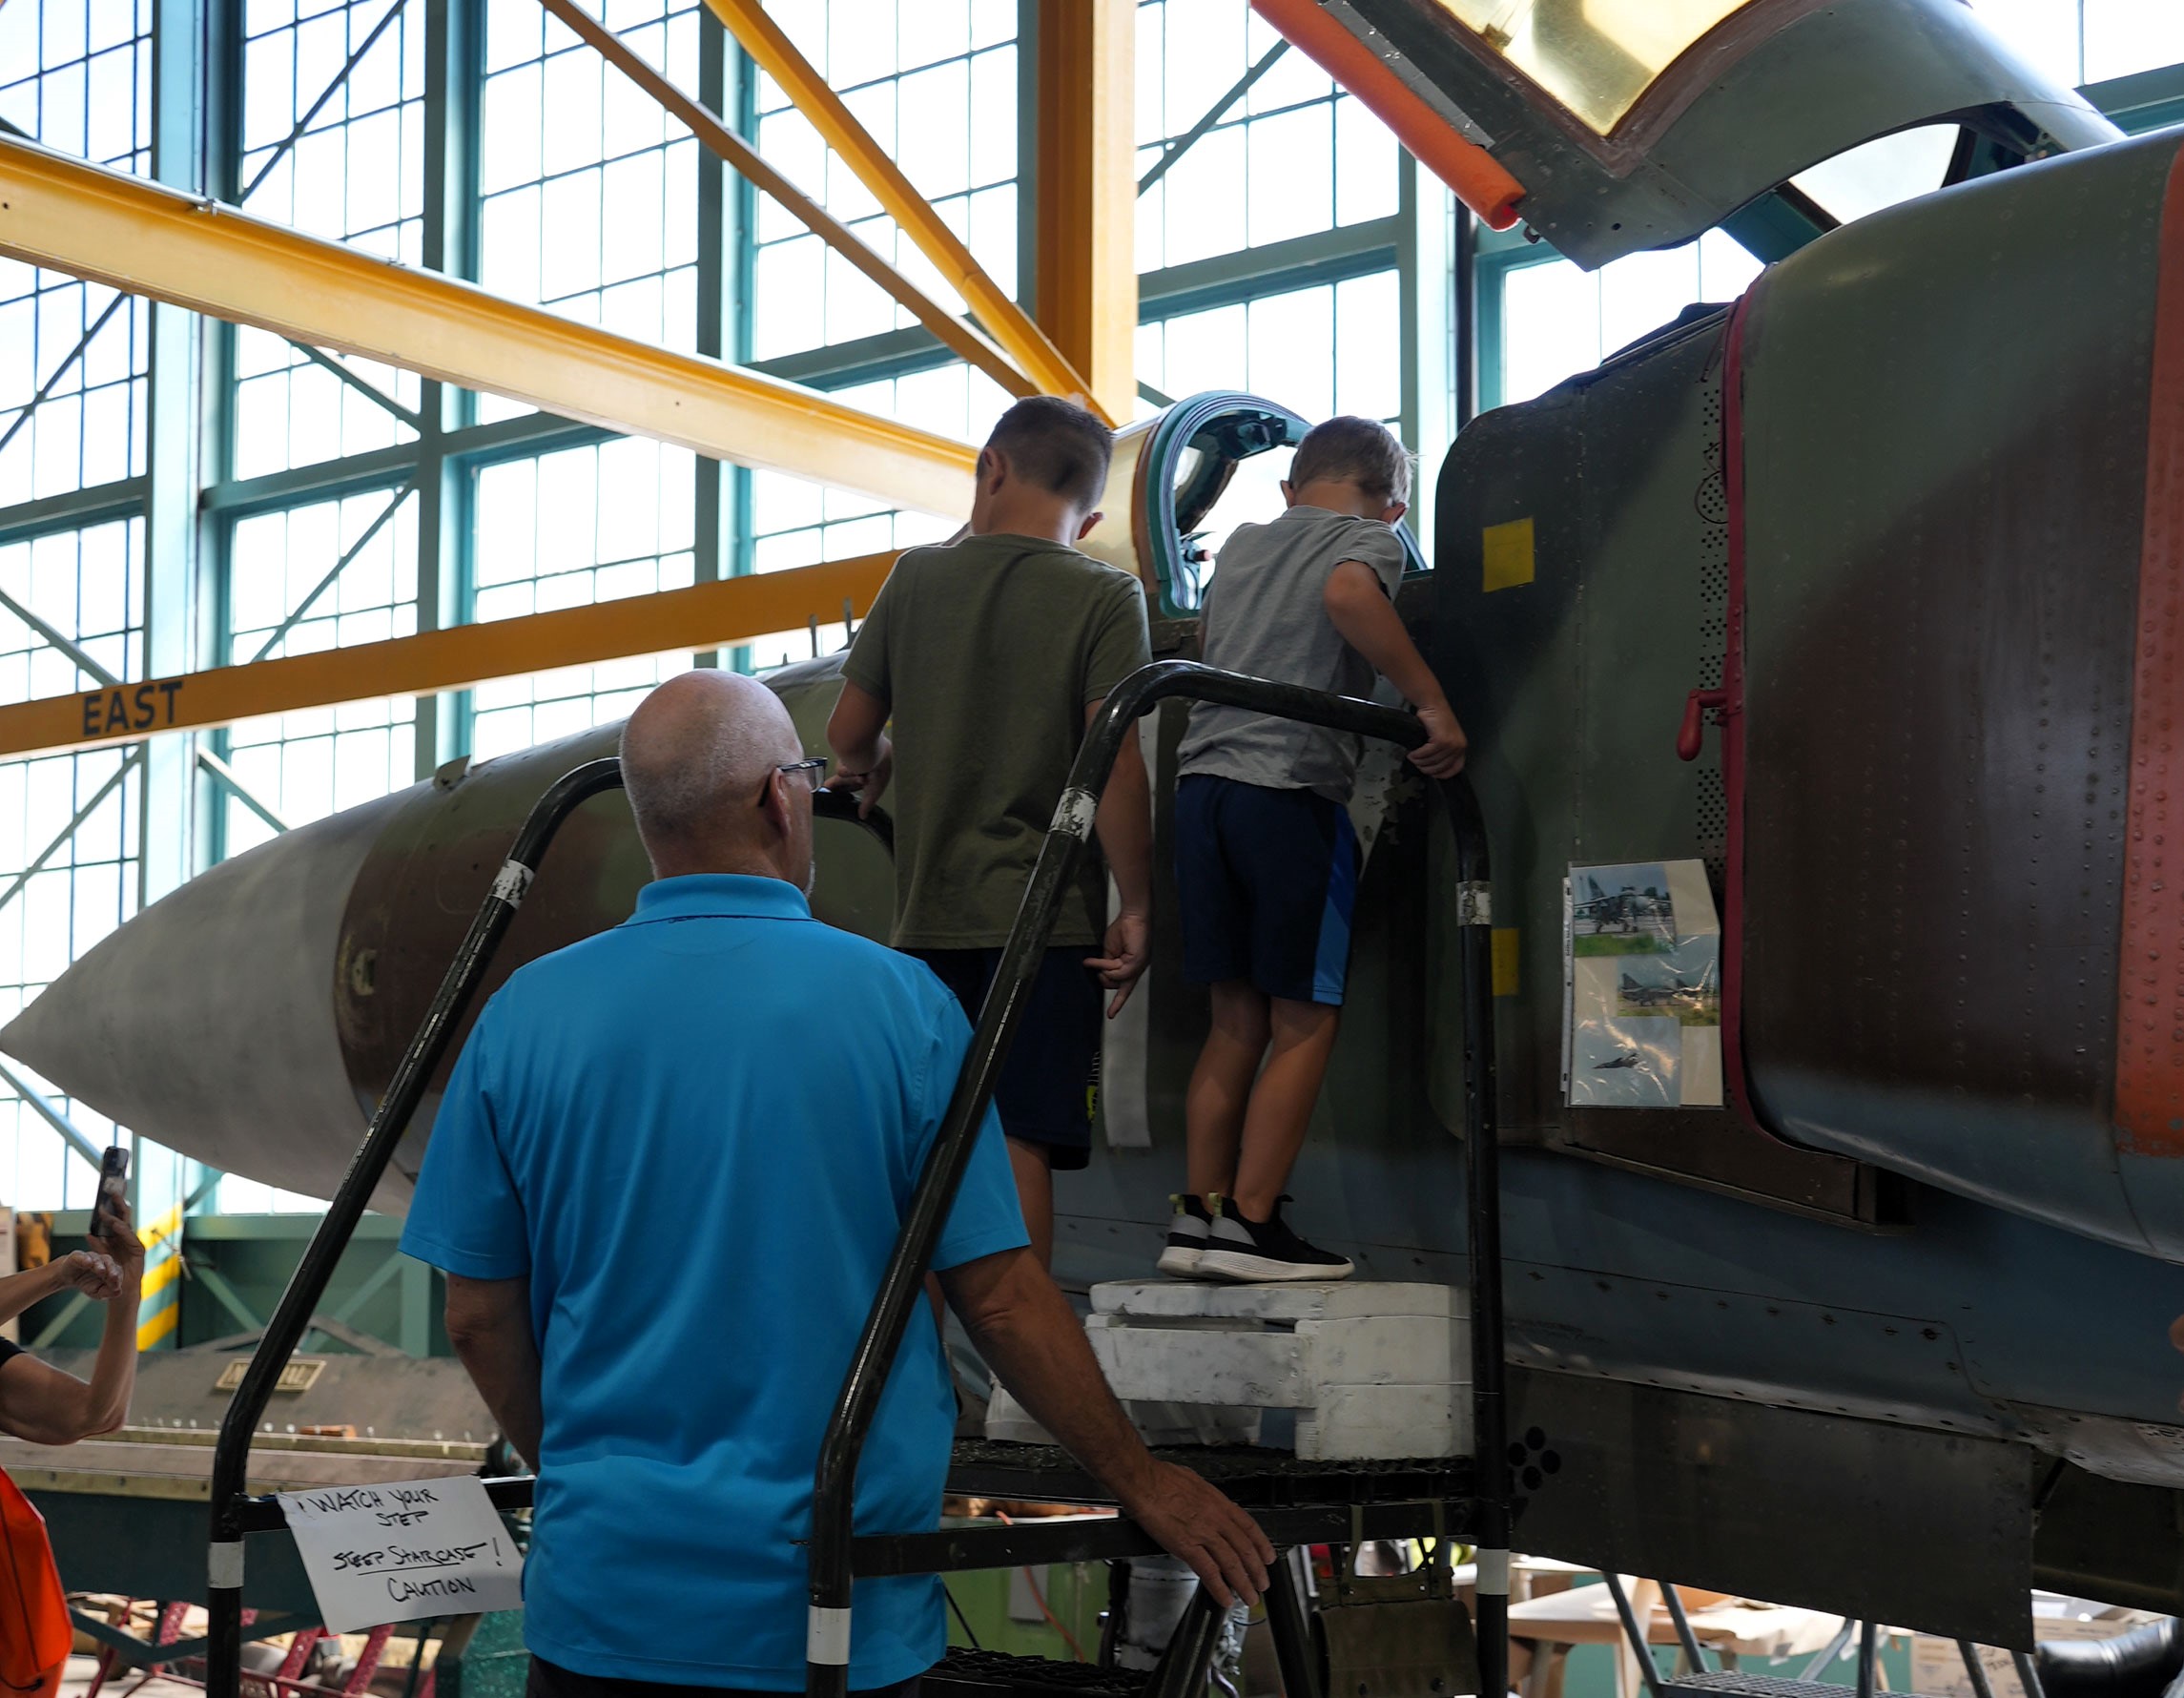 Kids looking inside the cockpit of the MiG-23